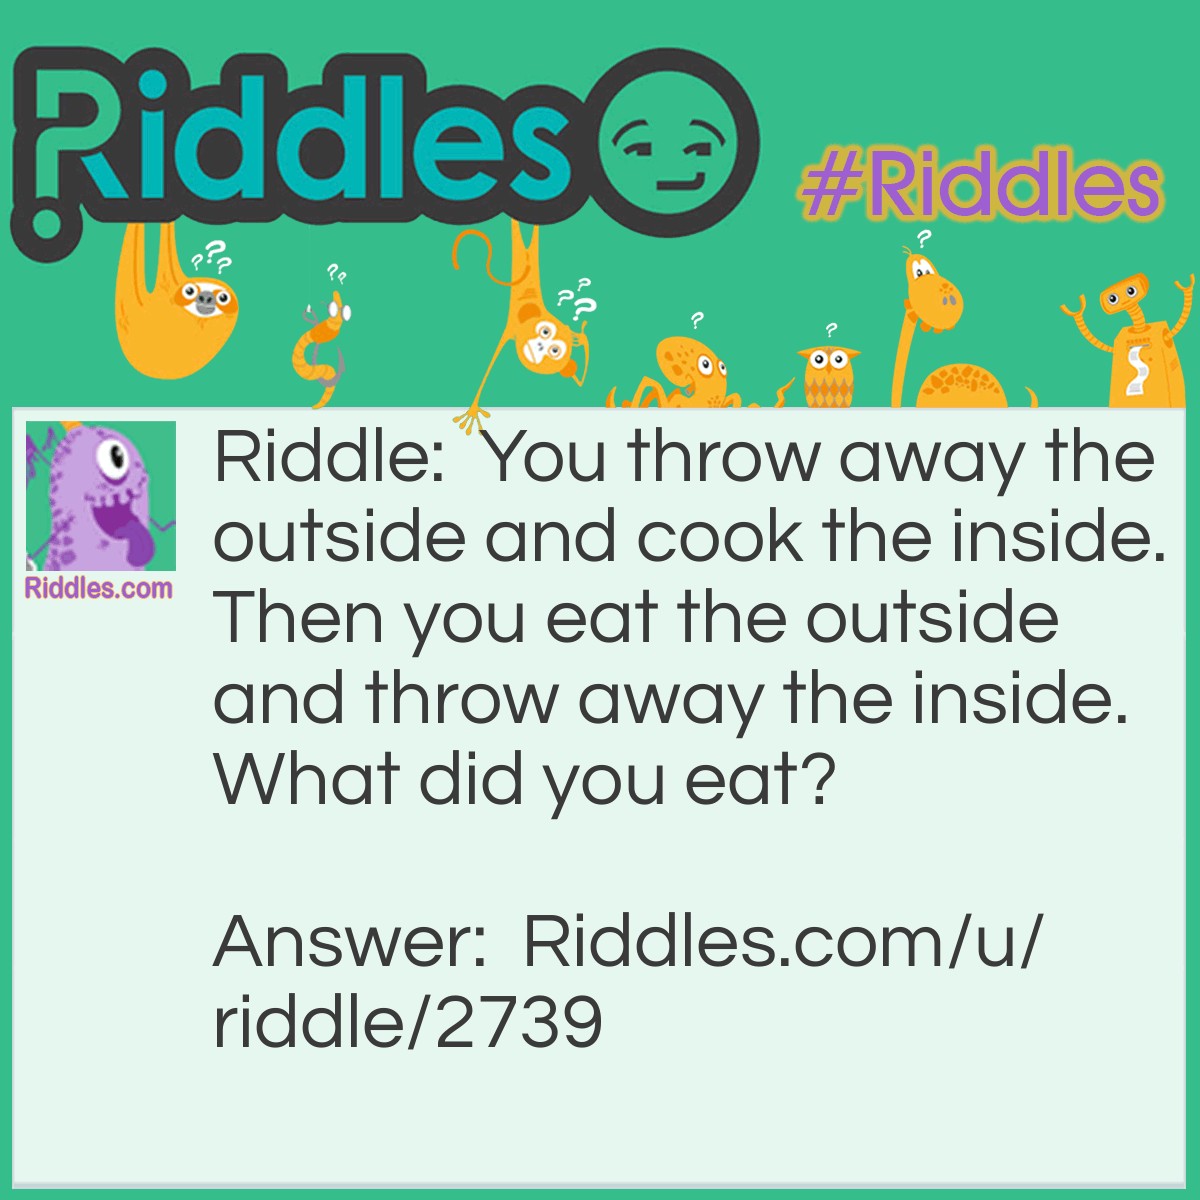 Riddle: You throw away the outside and cook the inside. Then you eat the outside and throw away the inside. What did you eat? Answer: An ear of corn.